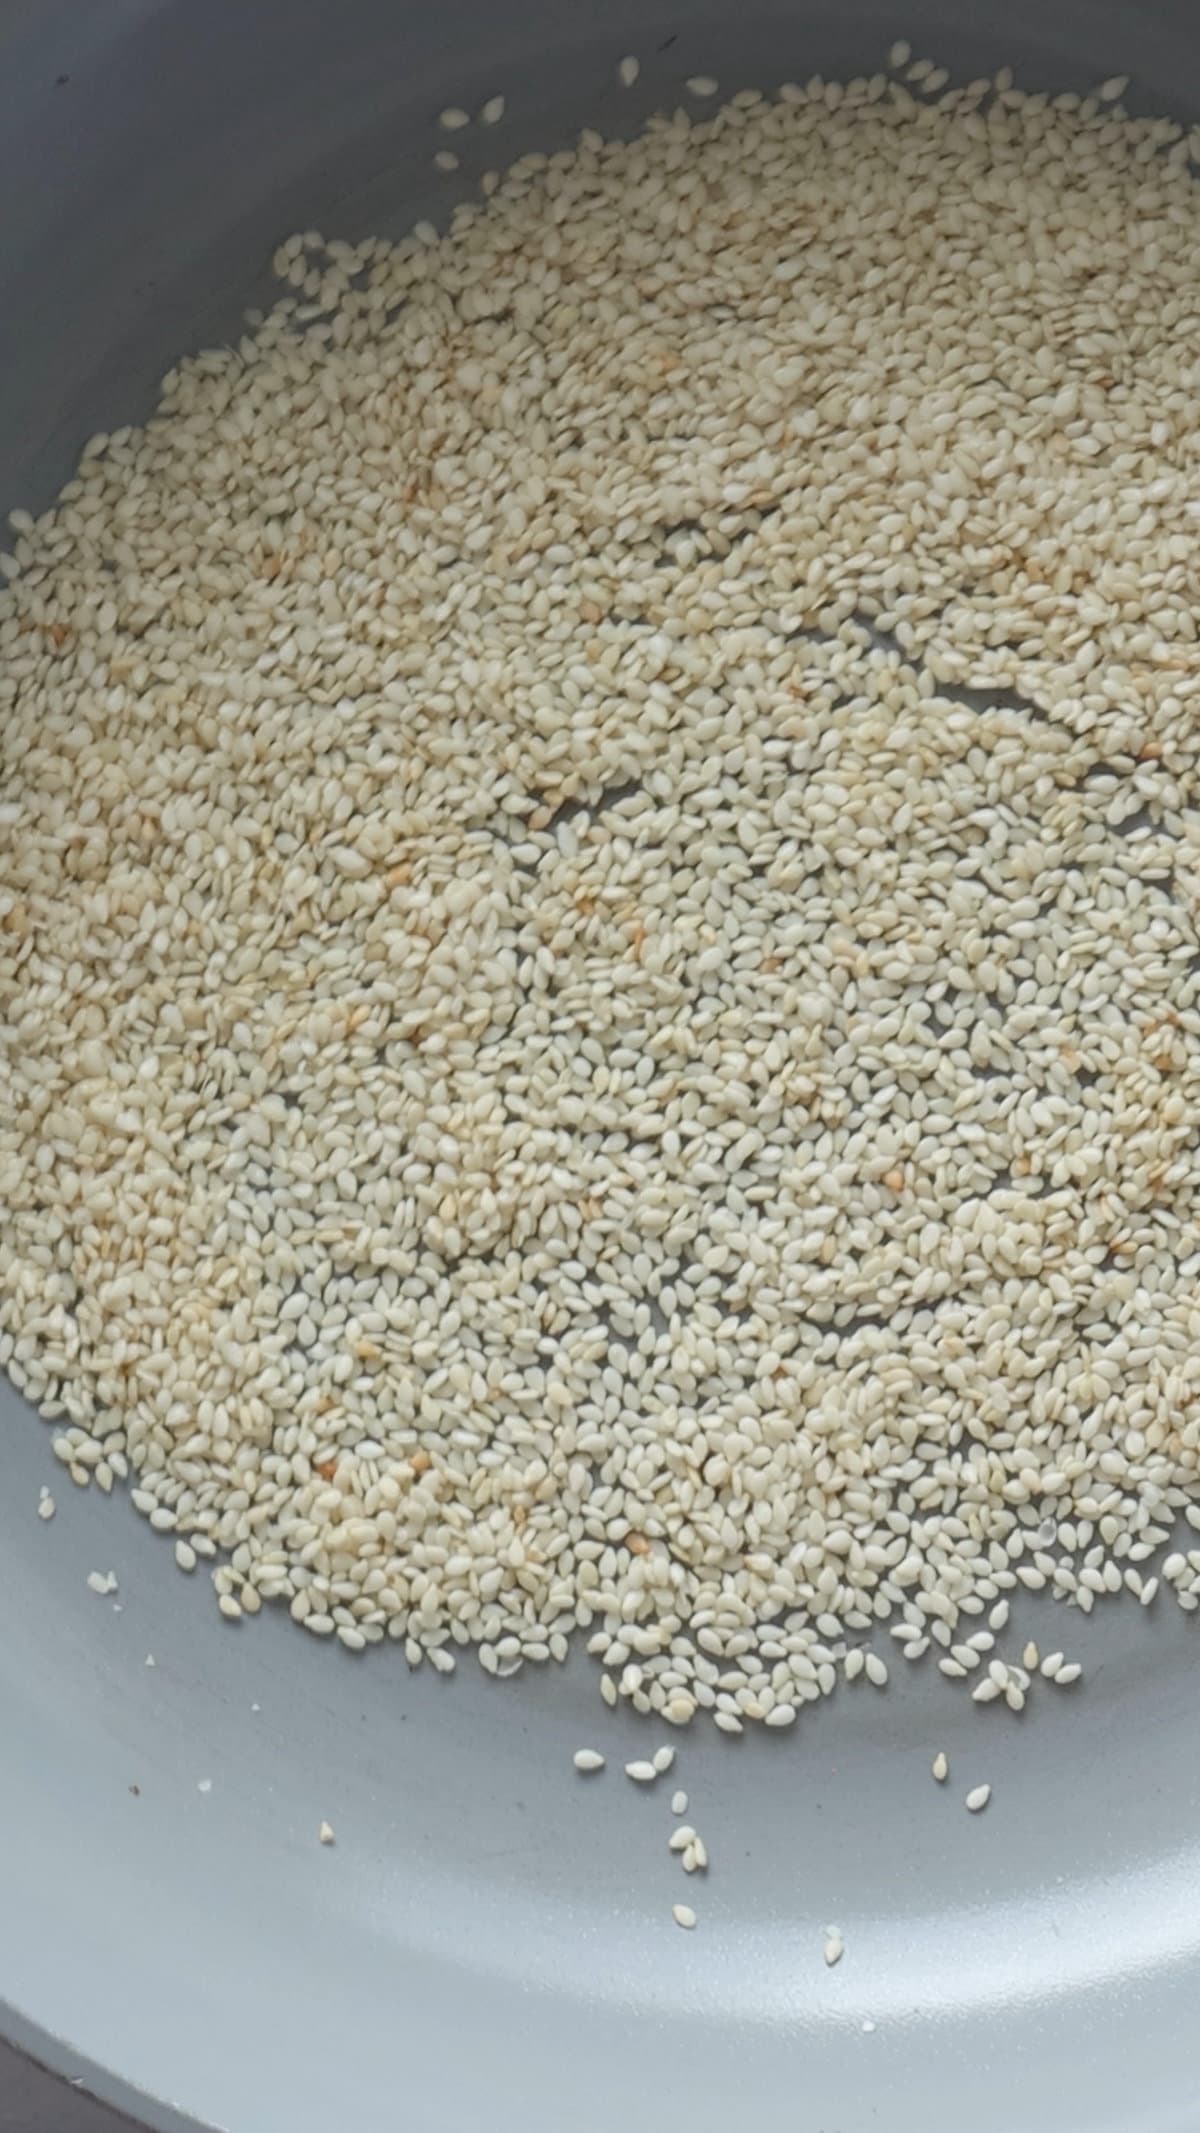 An overhead image of sesame seeds being toasted.